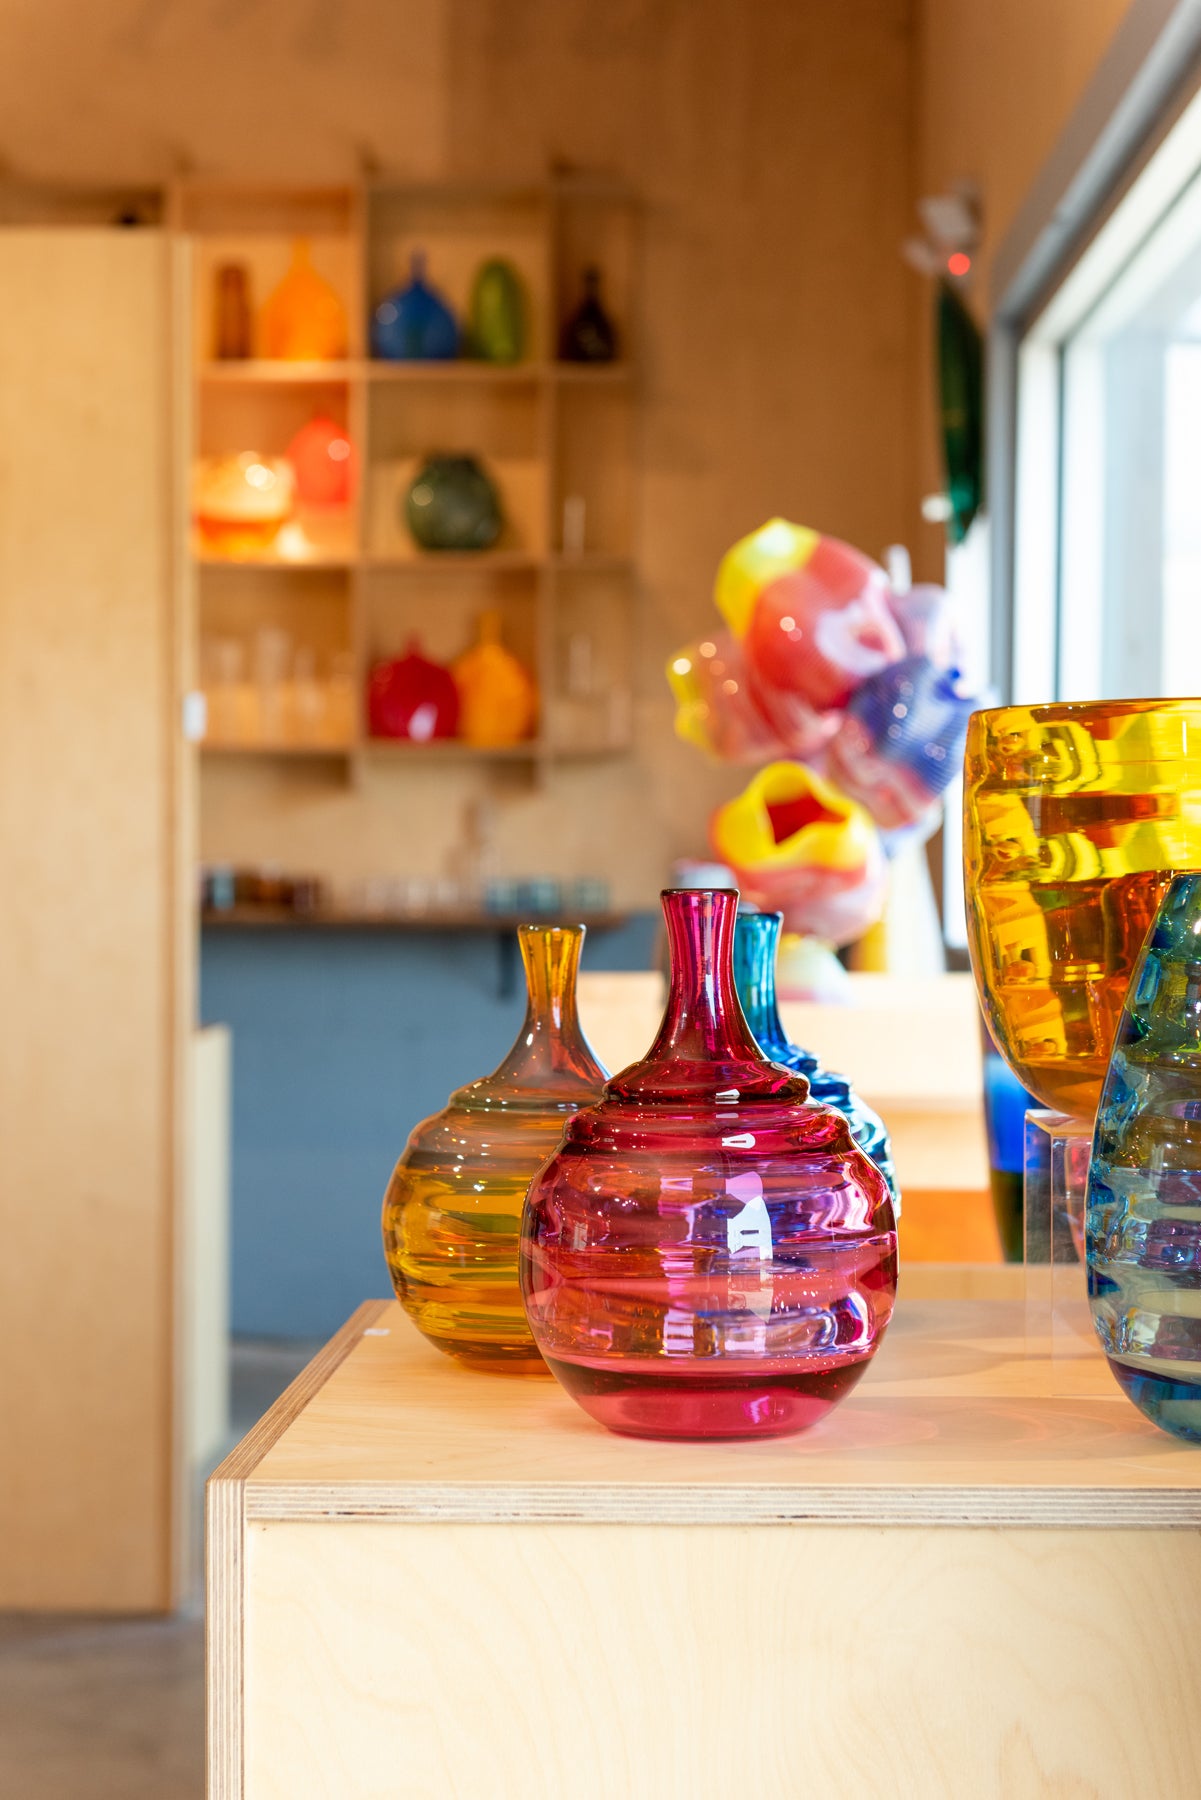 A view inside the Small Batch Glass gallery in Asheville of some brightly colored glass vases with more work in the background. Image by Loam